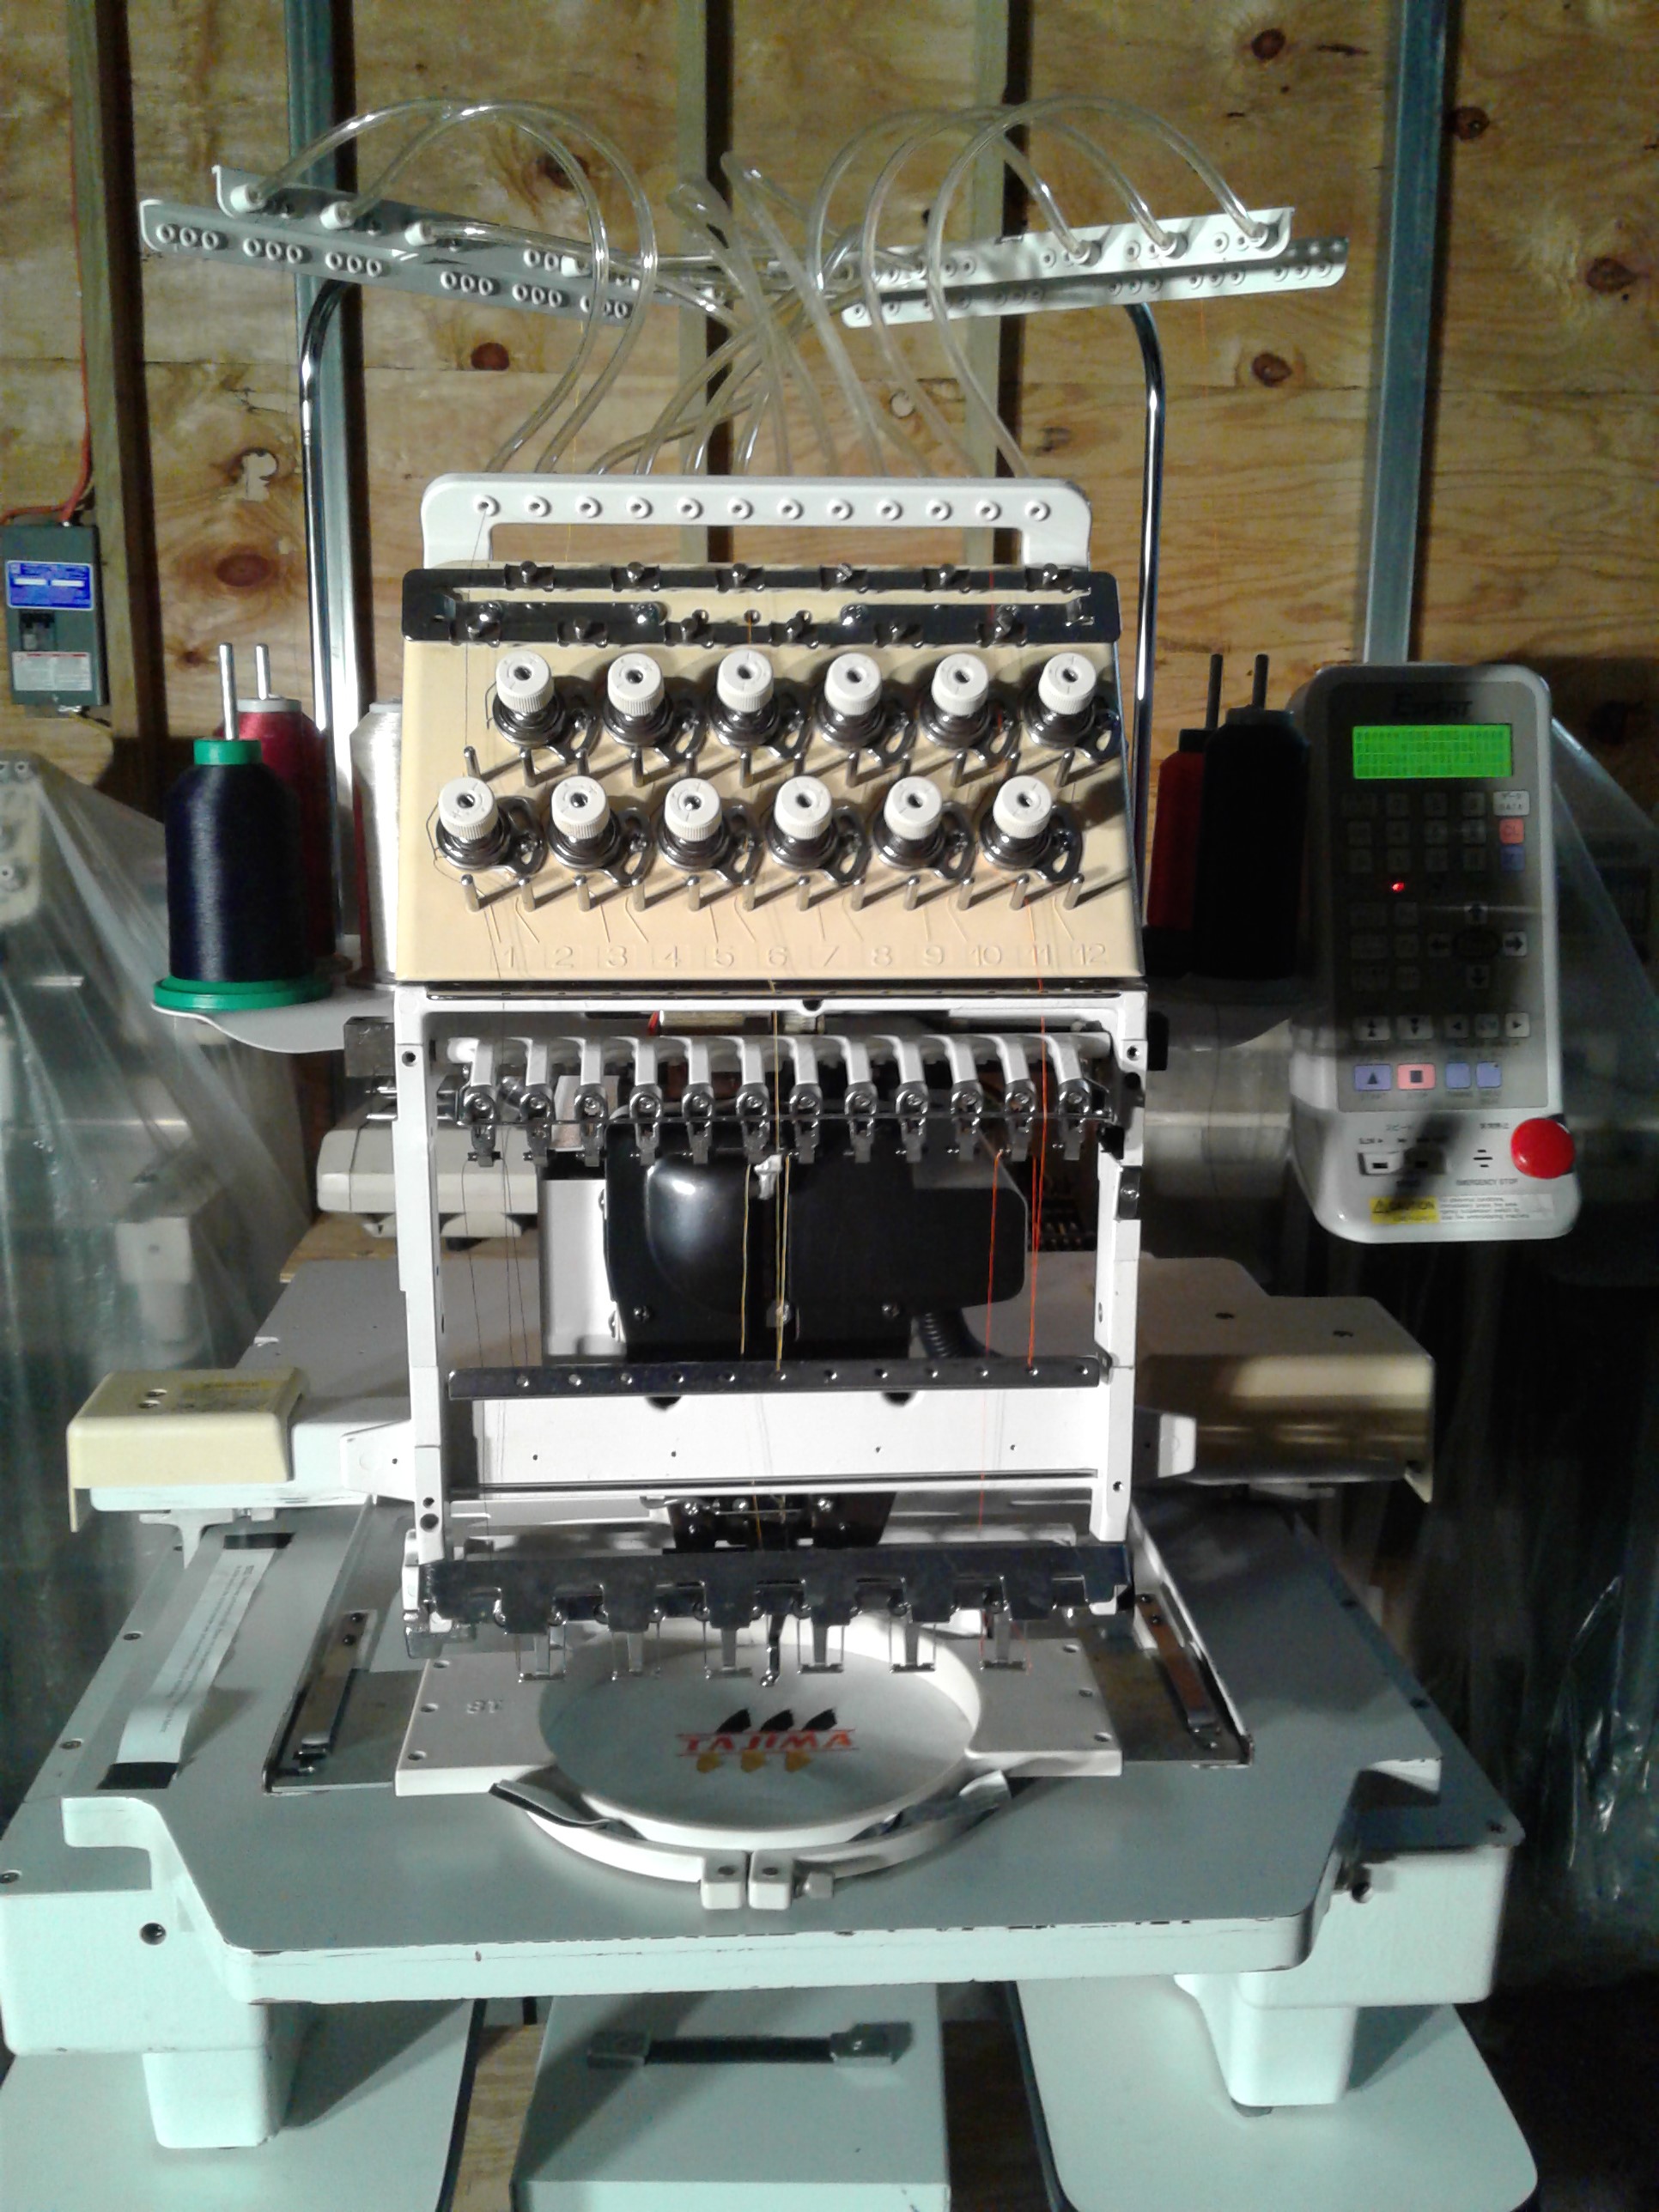 Toyota Expert ESP AD850 commercial embroidery machine w